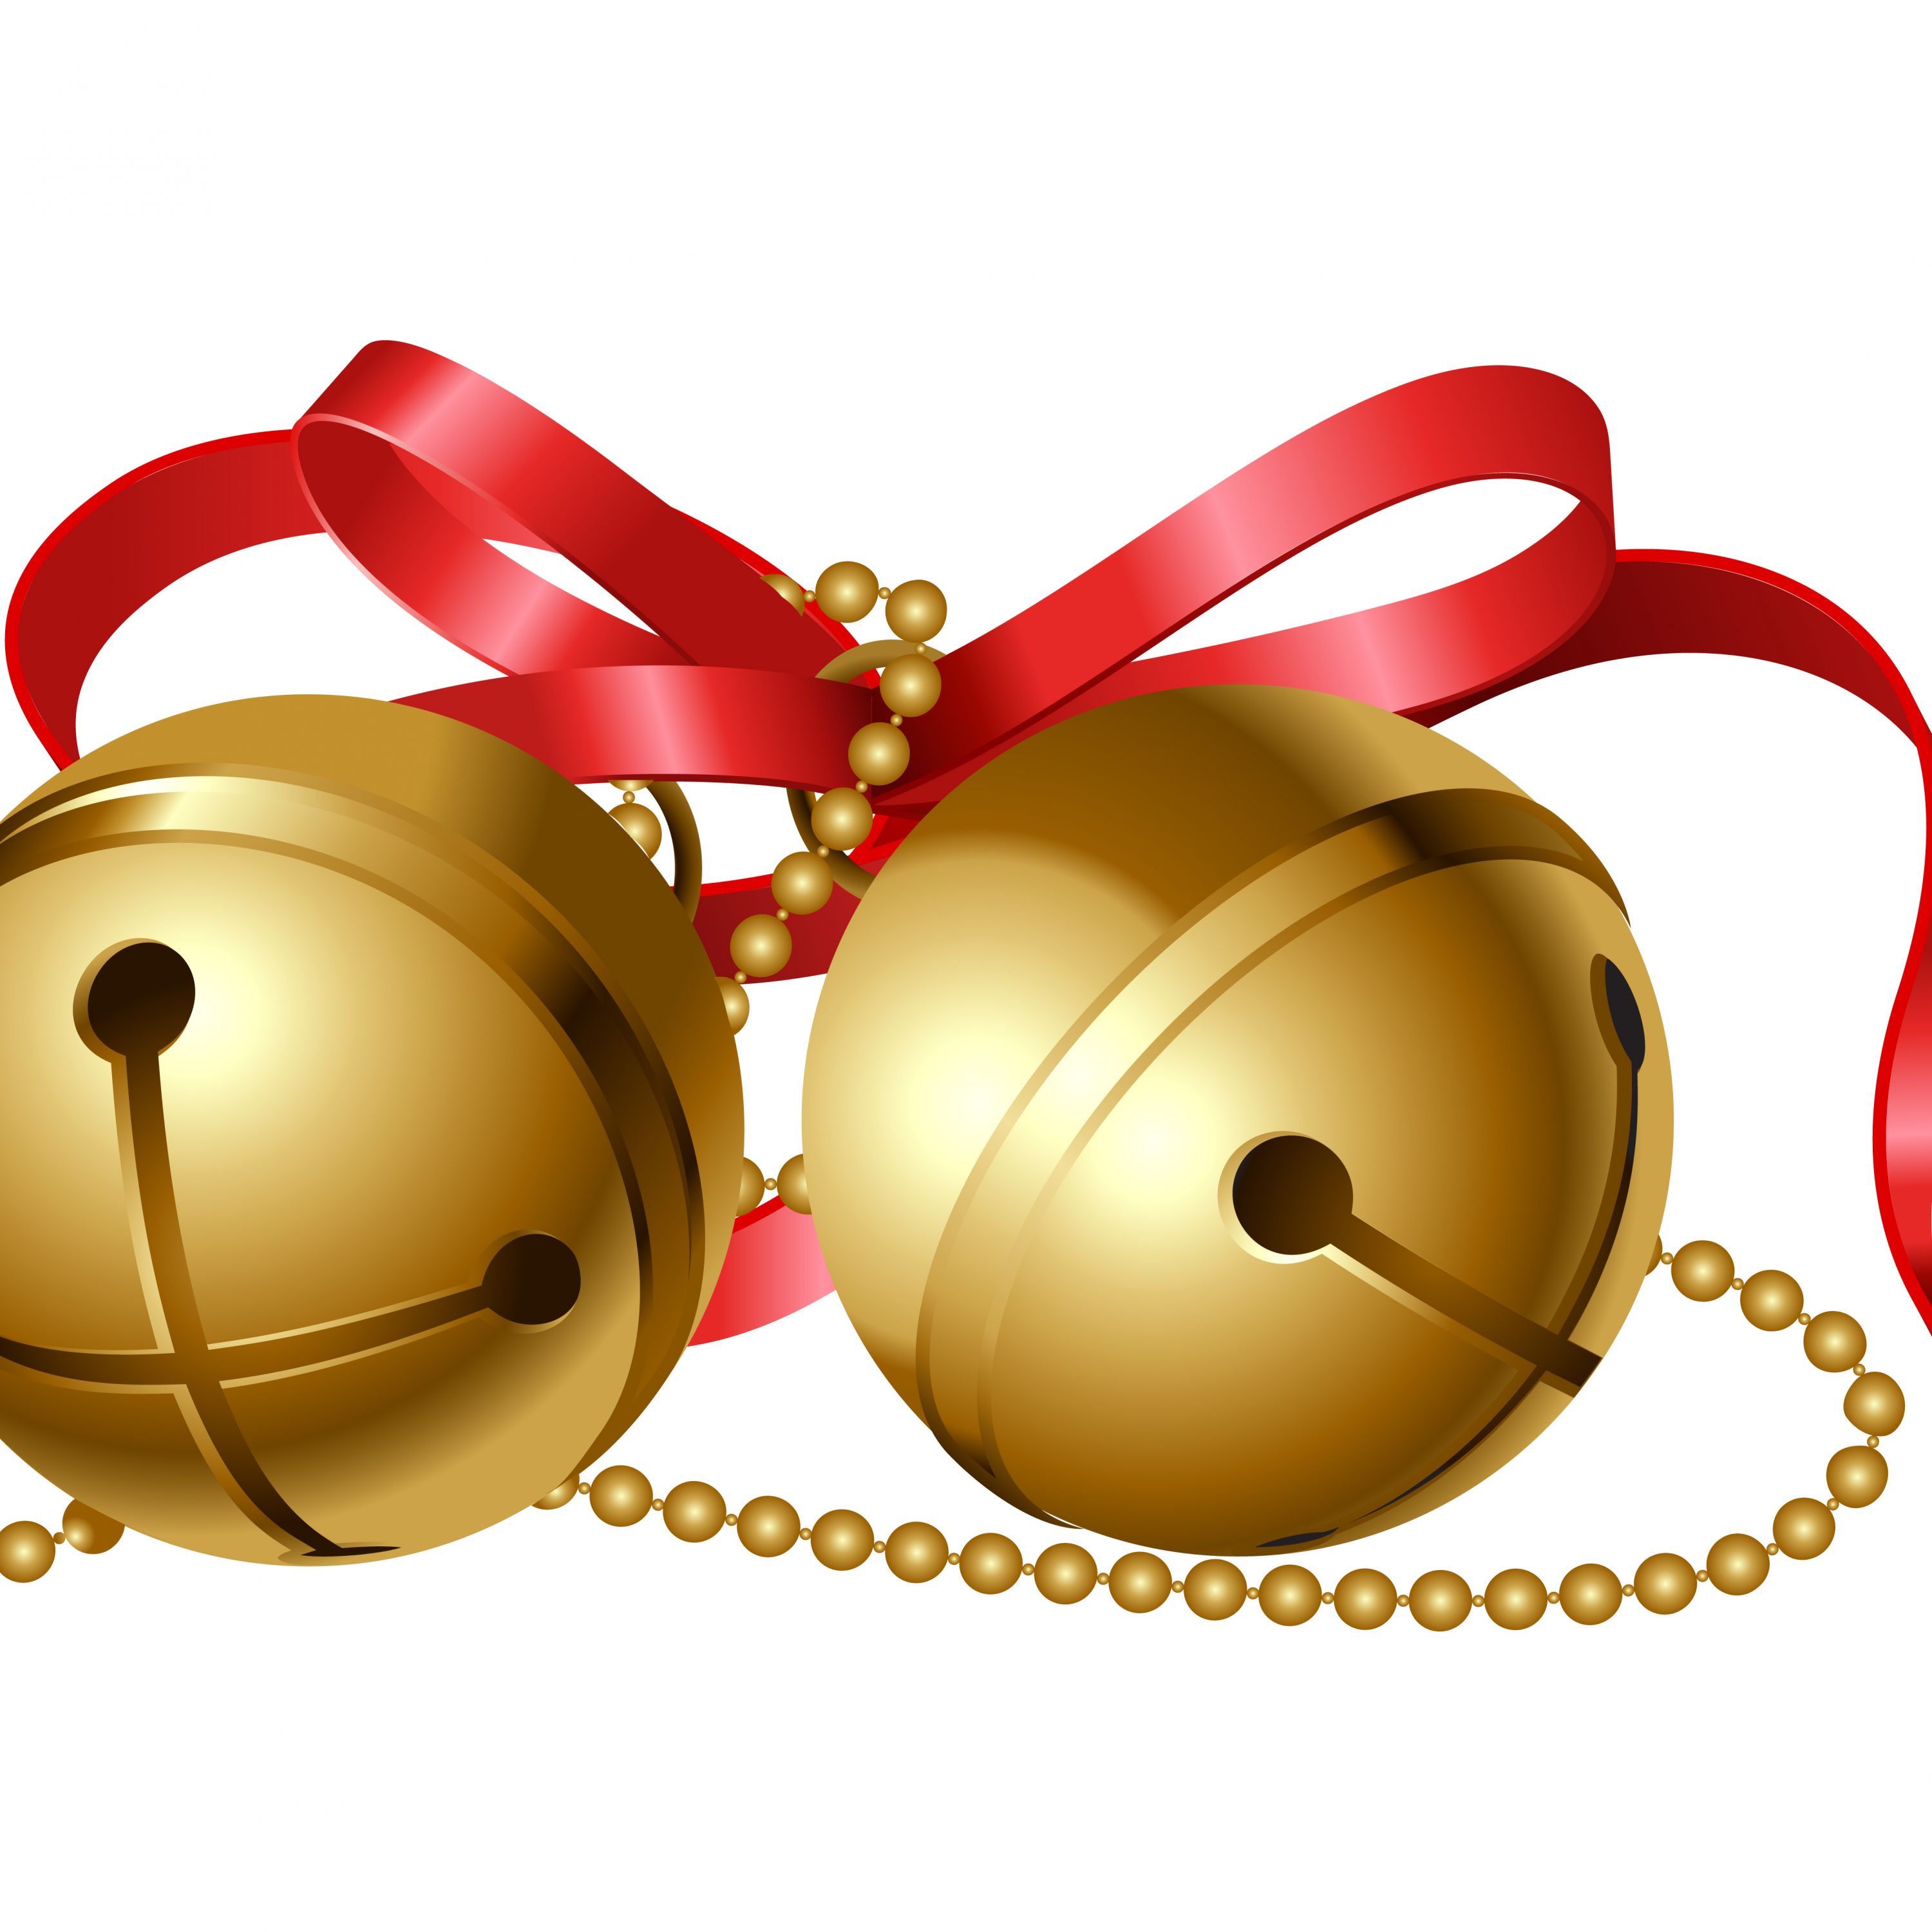 Bells clipart jingle bells, Bells jingle bells Transparent FREE for ...